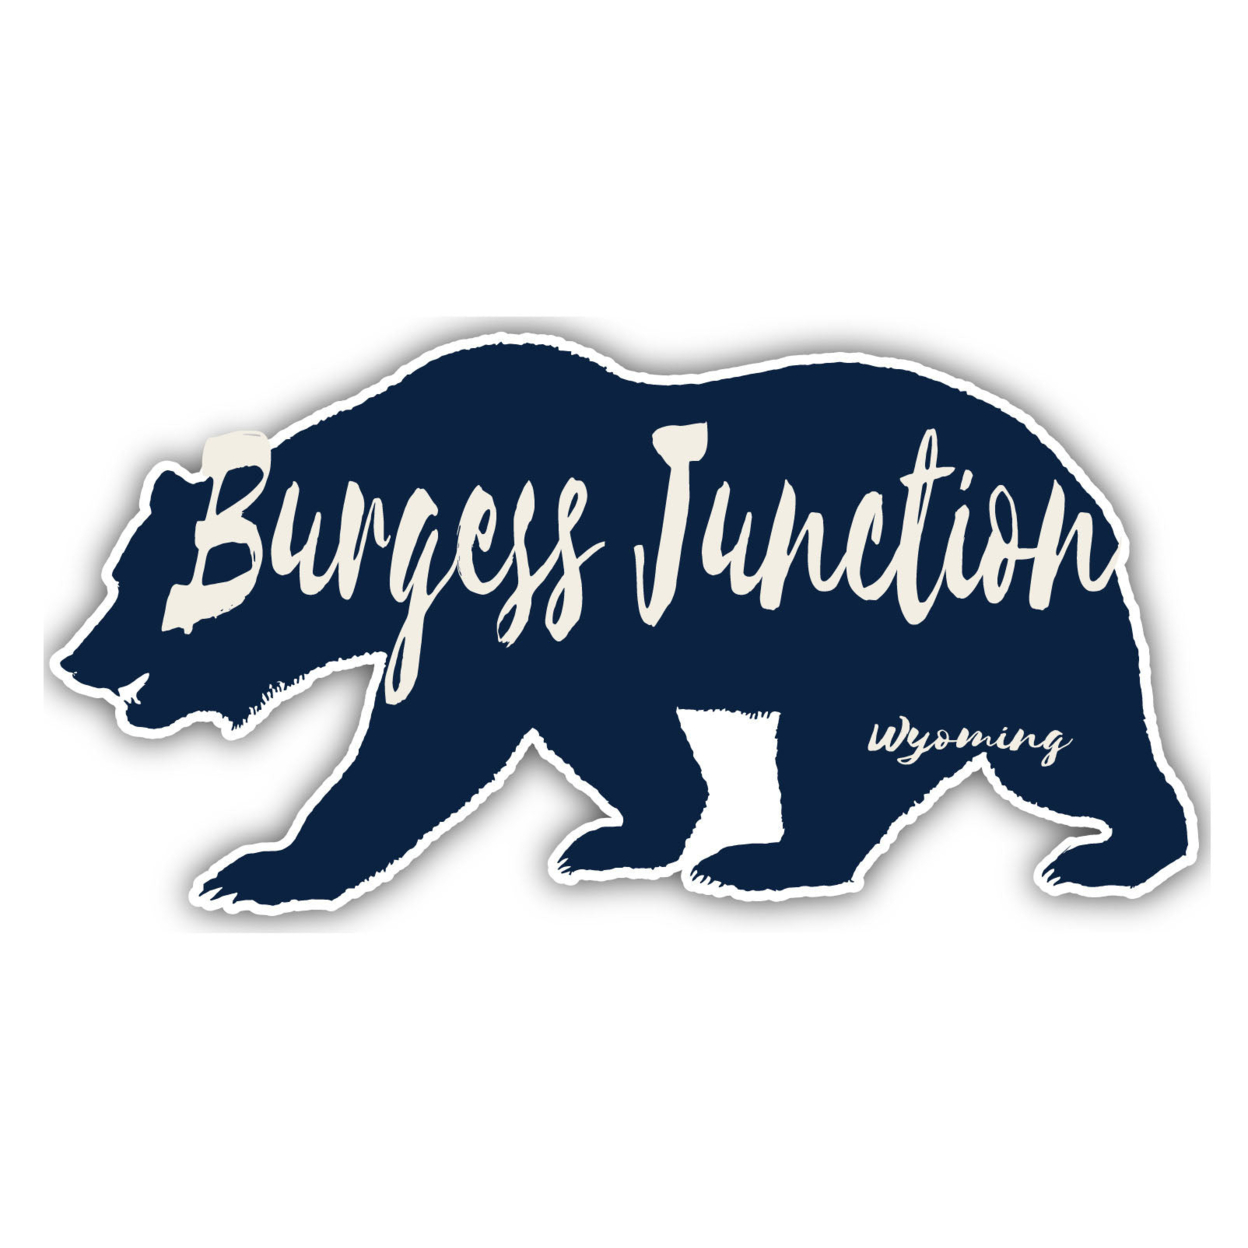 Burgess Junction Wyoming Souvenir Decorative Stickers (Choose Theme And Size) - Single Unit, 10-Inch, Adventures Awaits